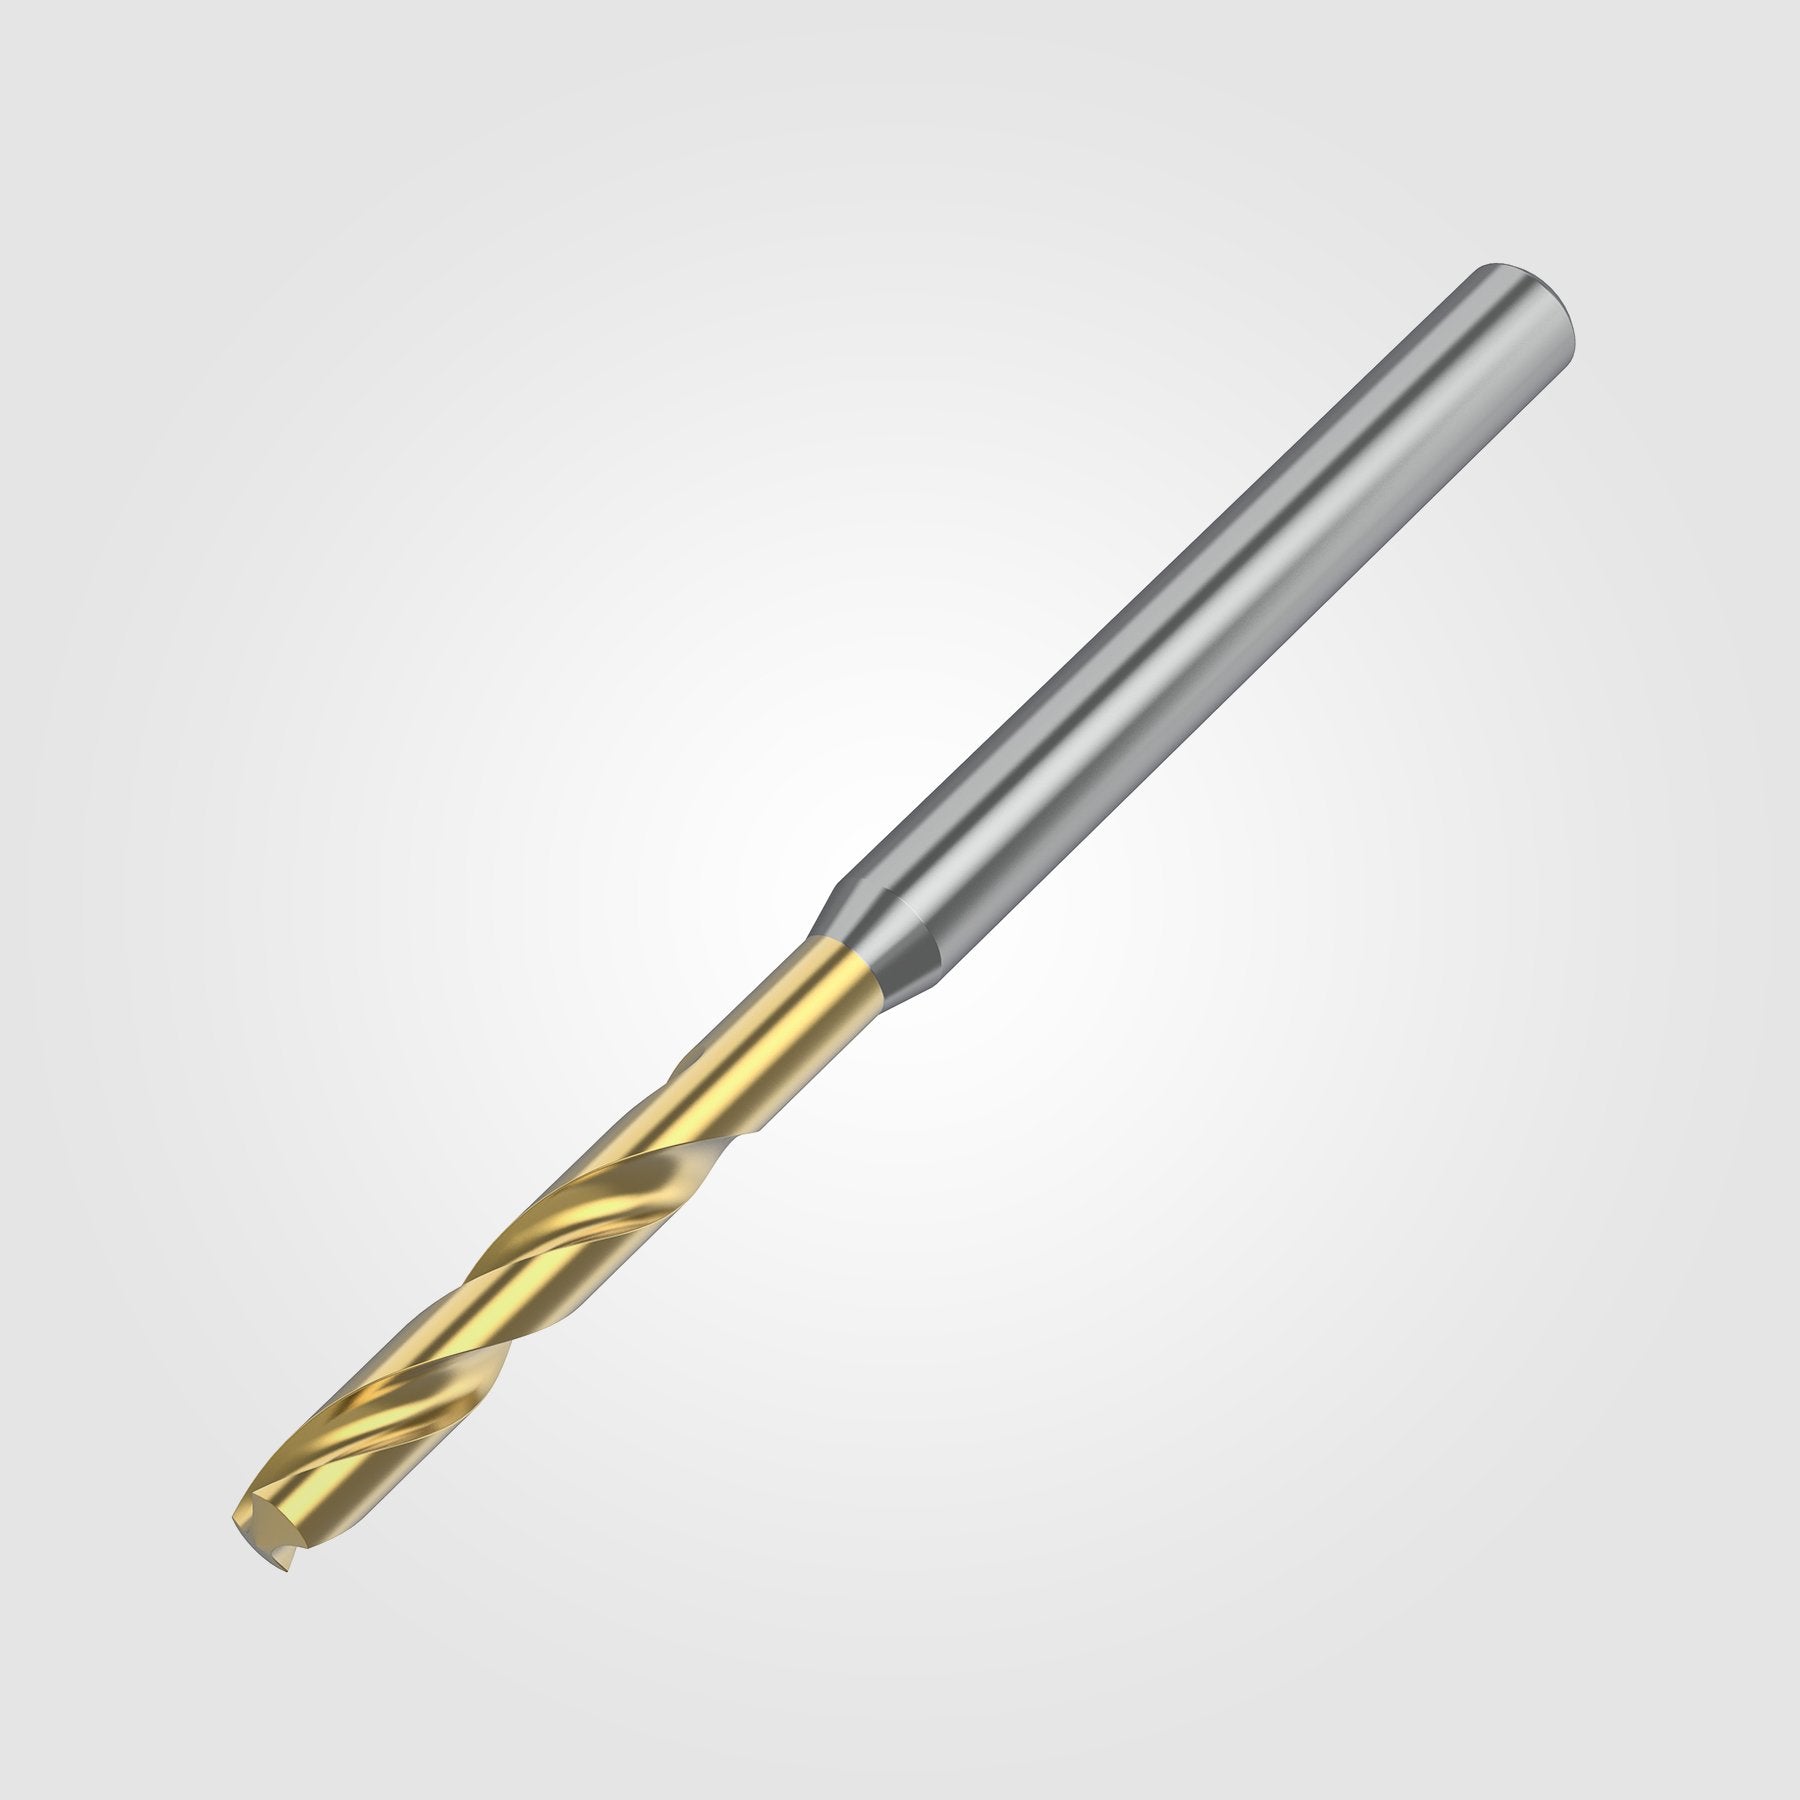 GOdrill (THROUGH COOLANT) | 15.9mm / .6260" / 3xD | SOLID CARBIDE DRILL | 4151275